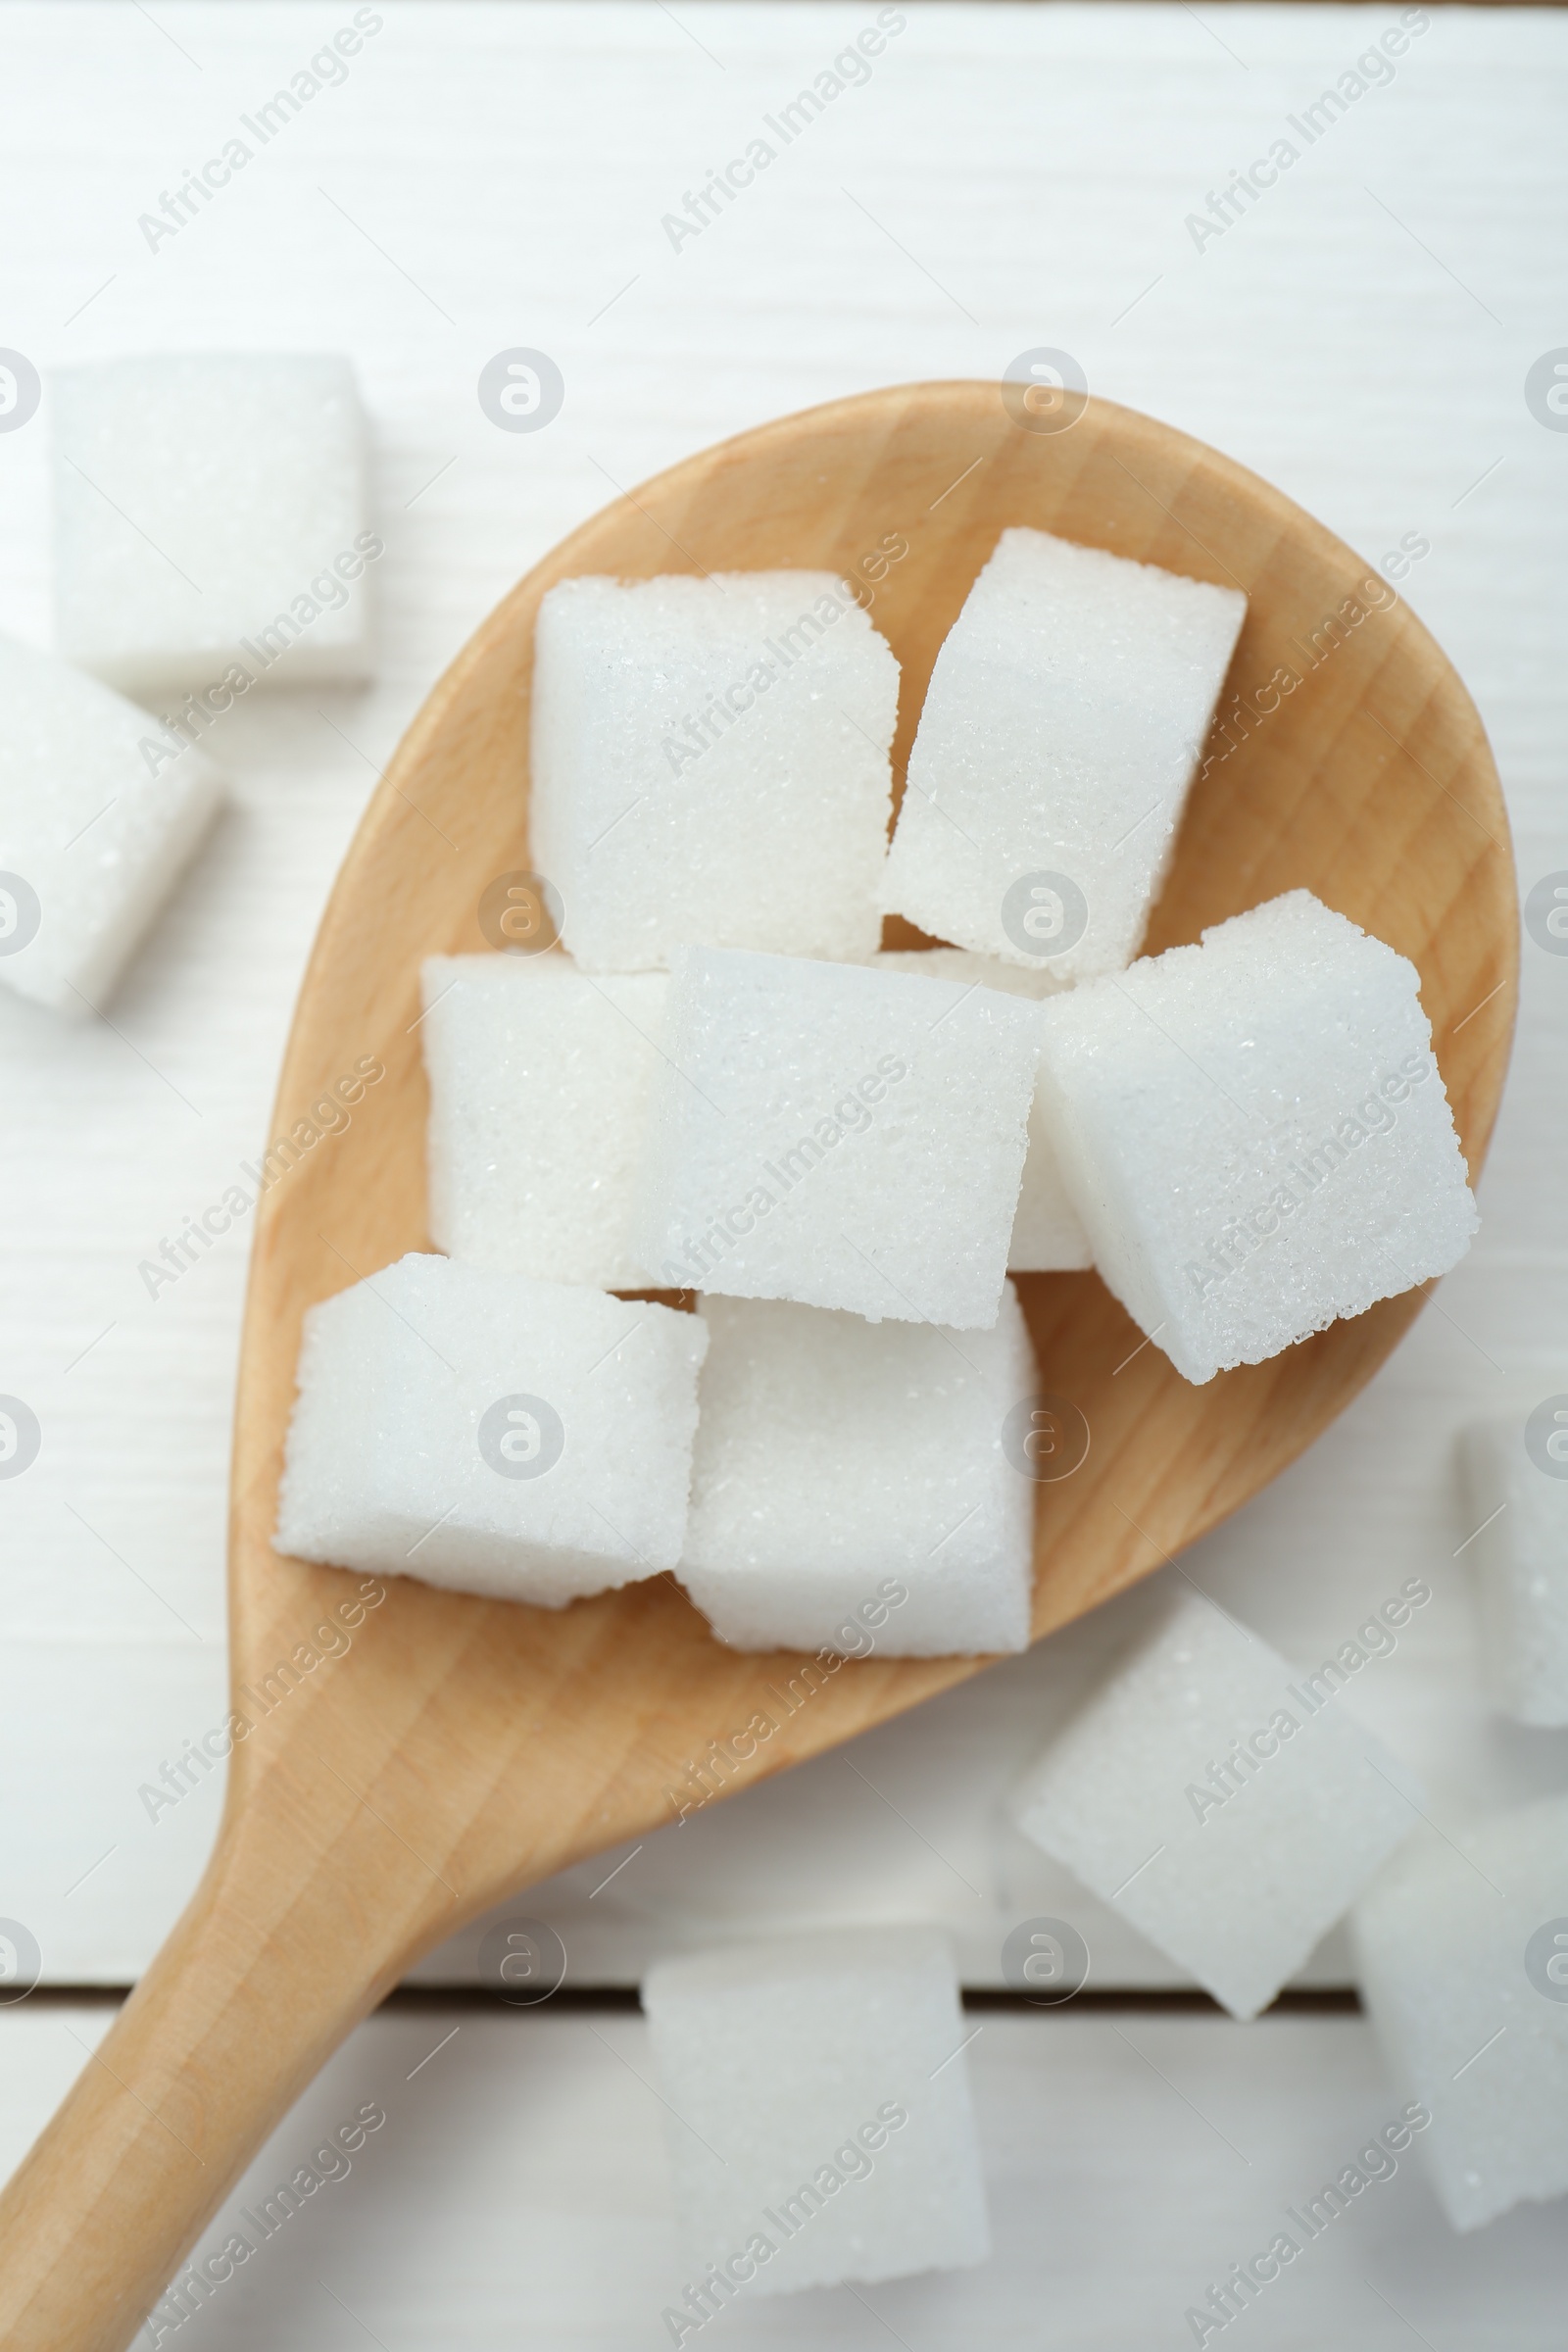 Photo of Many sugar cubes and wooden spoon on white table, top view